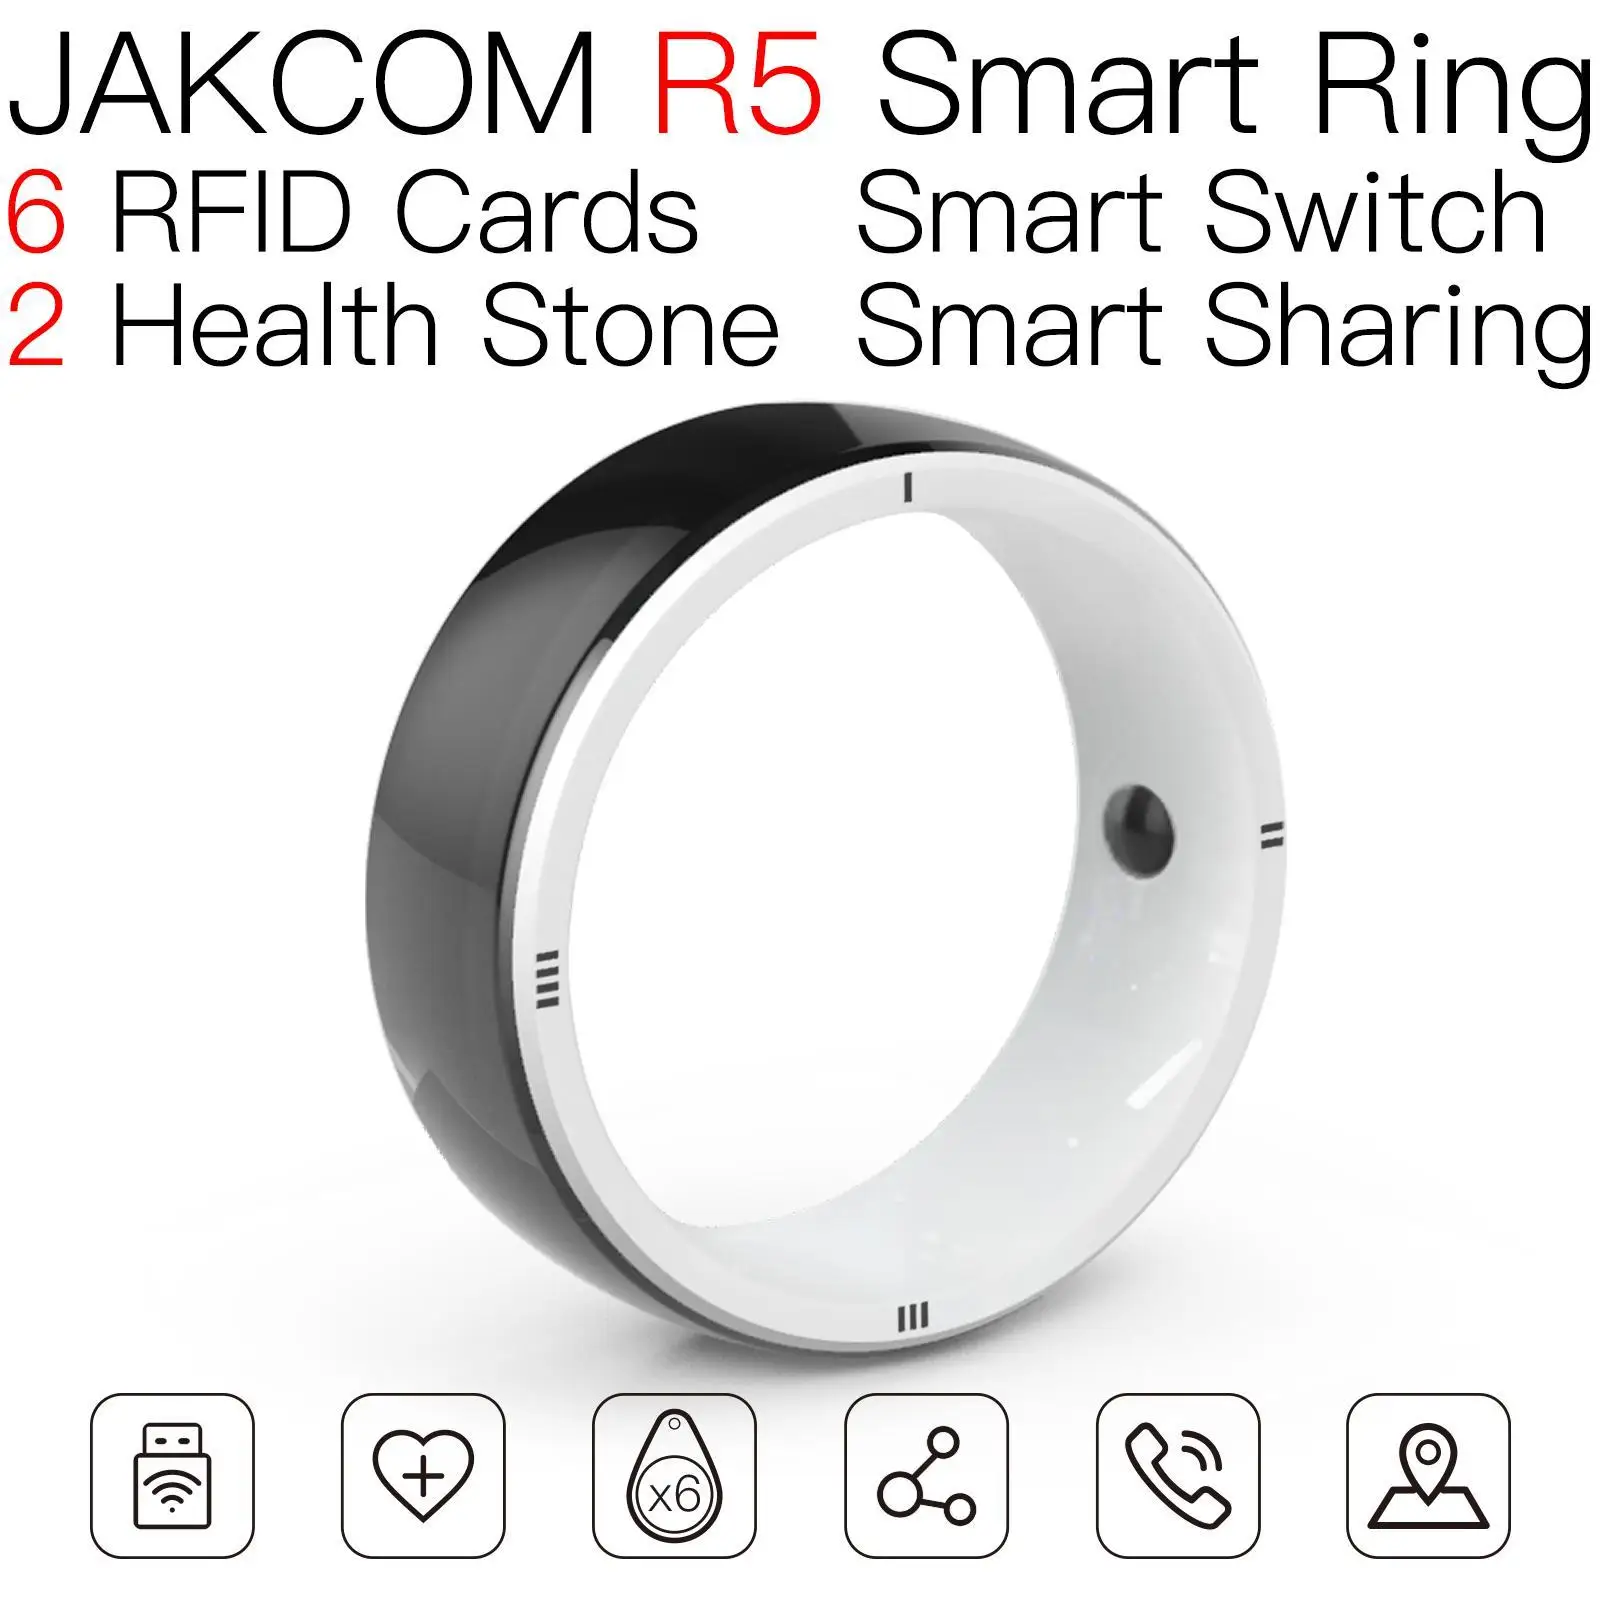 

JAKCOM R5 Smart Ring Newer than uid 7 card copier syscooling office licence for 1 s50 byte changeable gps con